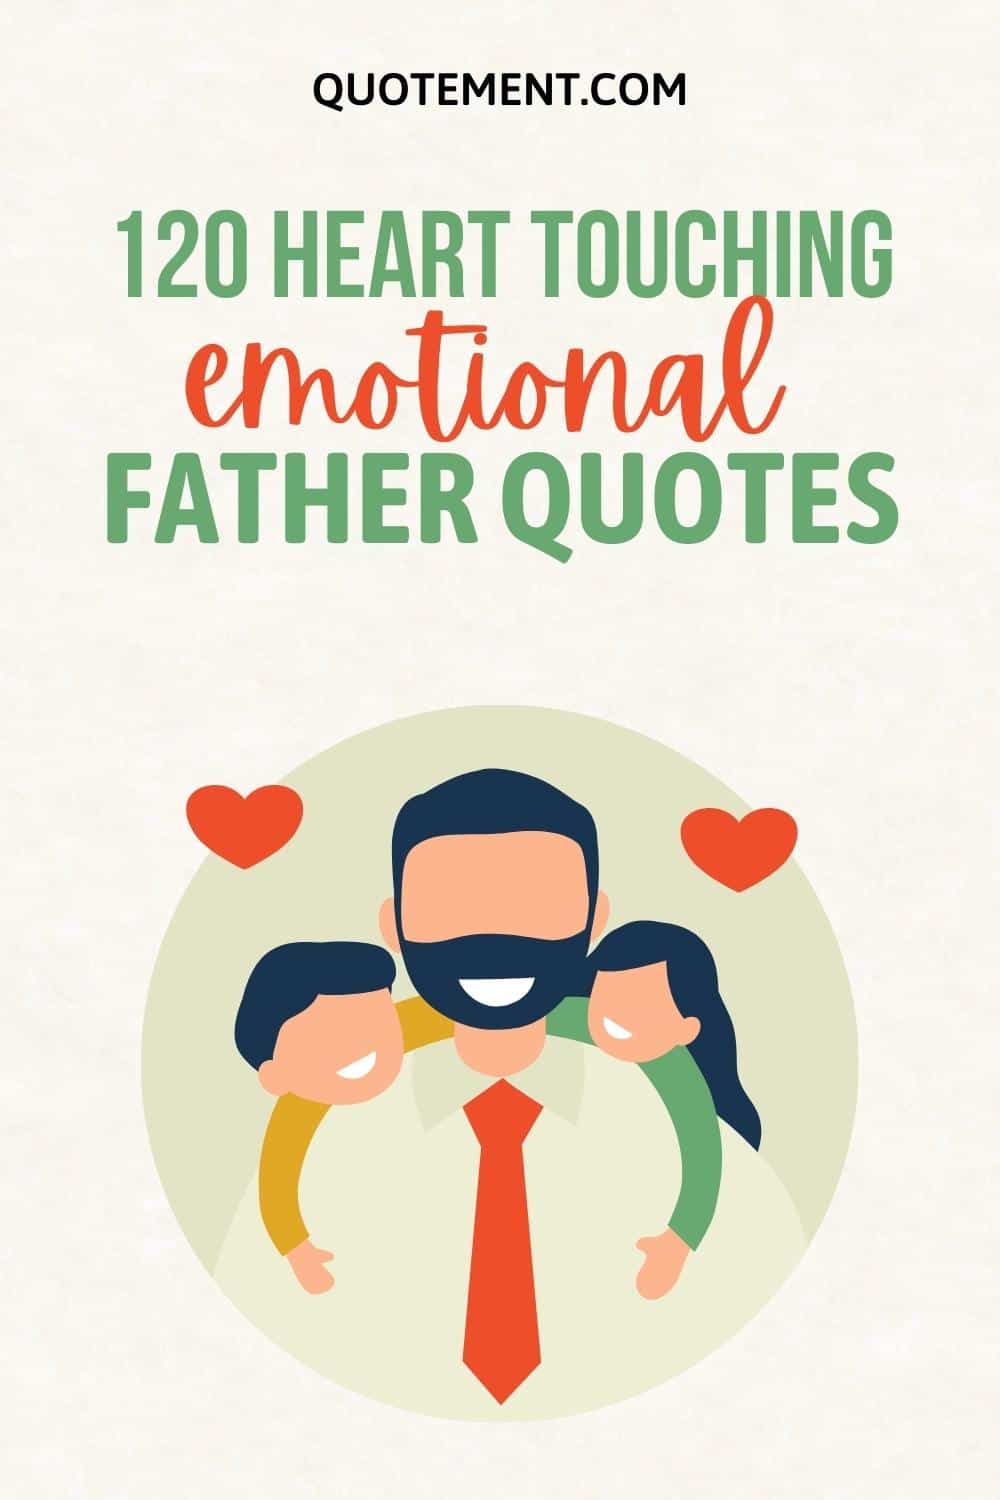 120 Emotional Father Quotes To Share With Your Dear Dad
